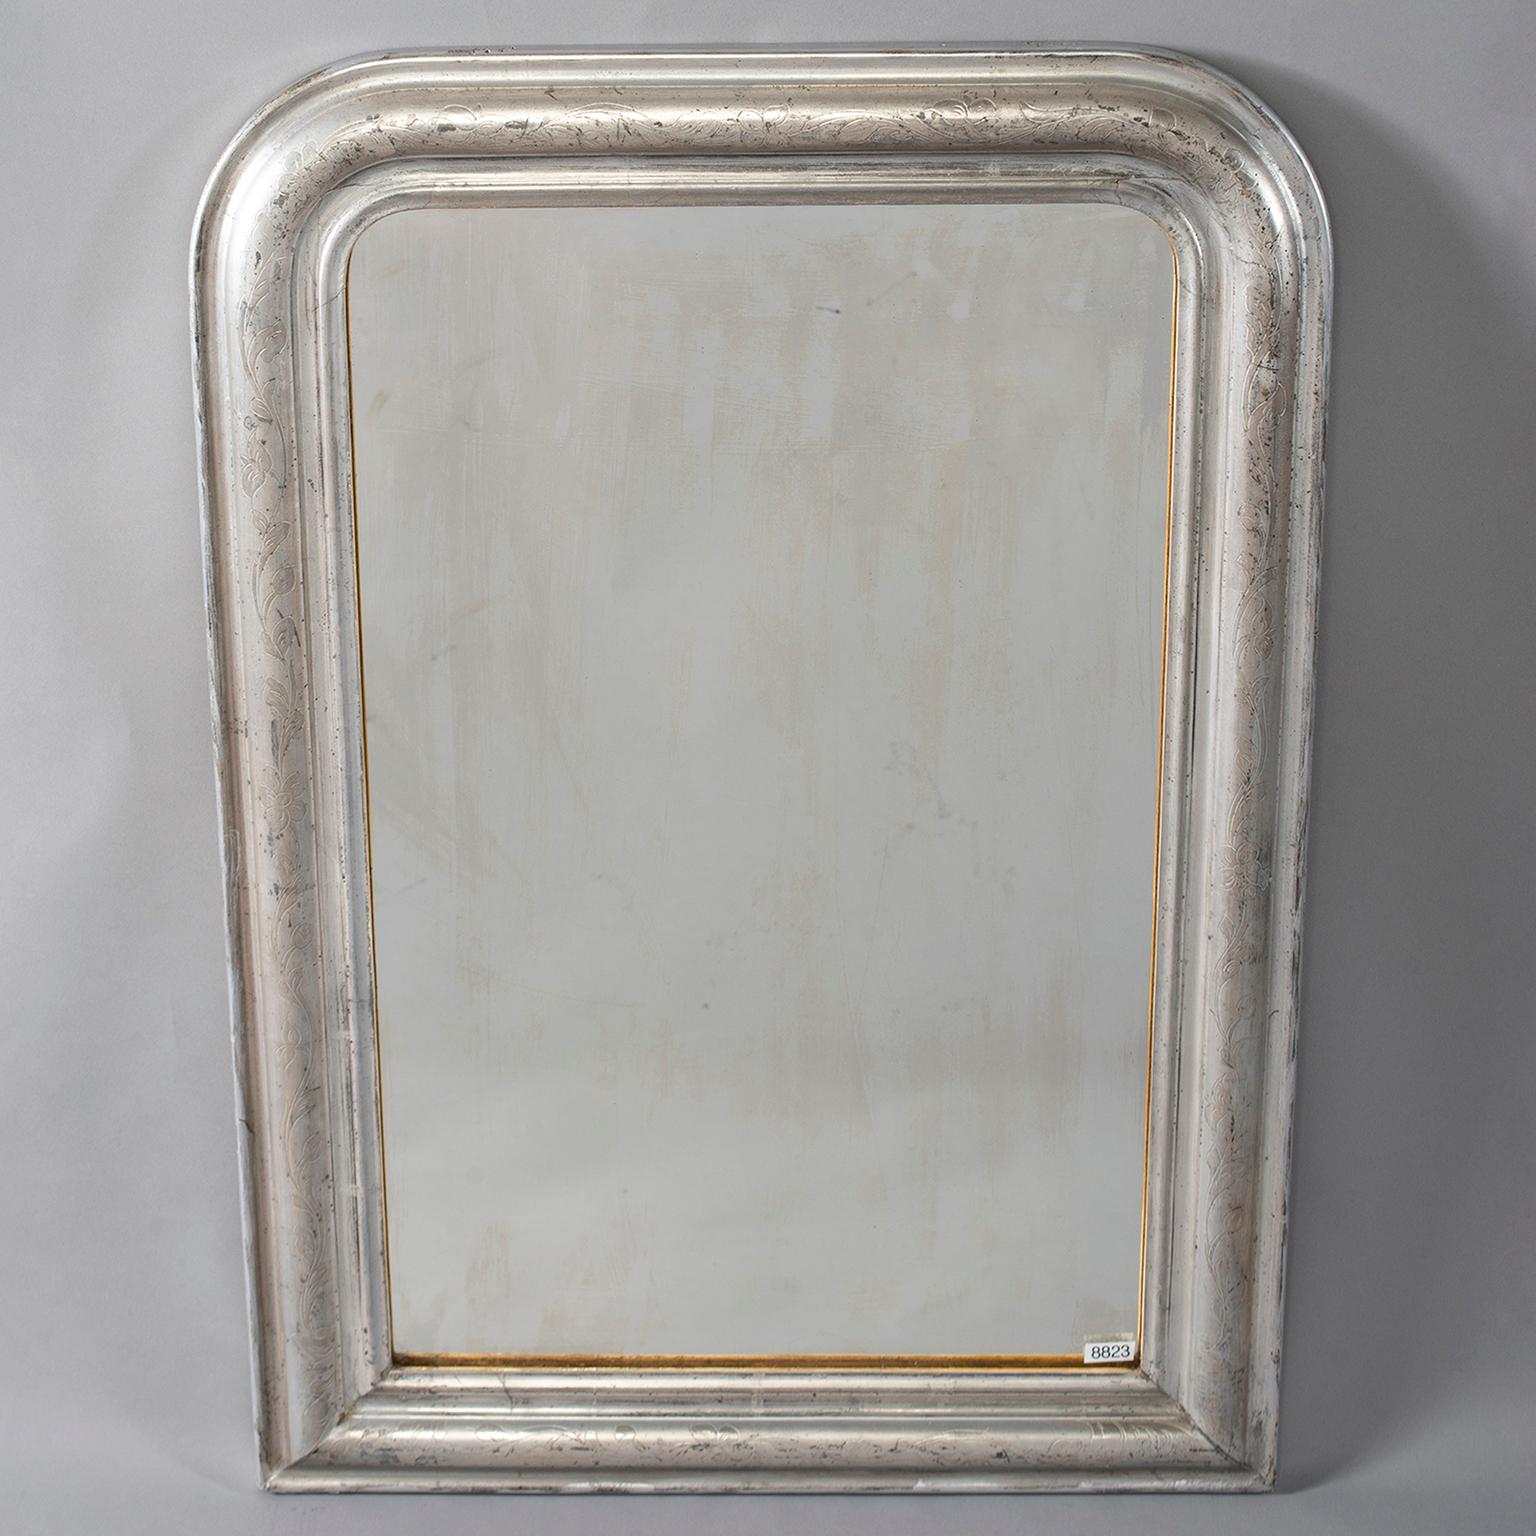 Louis Philippe mirror with silver gilt frame that has subtle, etched design of leaves and vines. Other similar silver gilt mirrors in various sizes available at the time of this posting, circa 1880s.